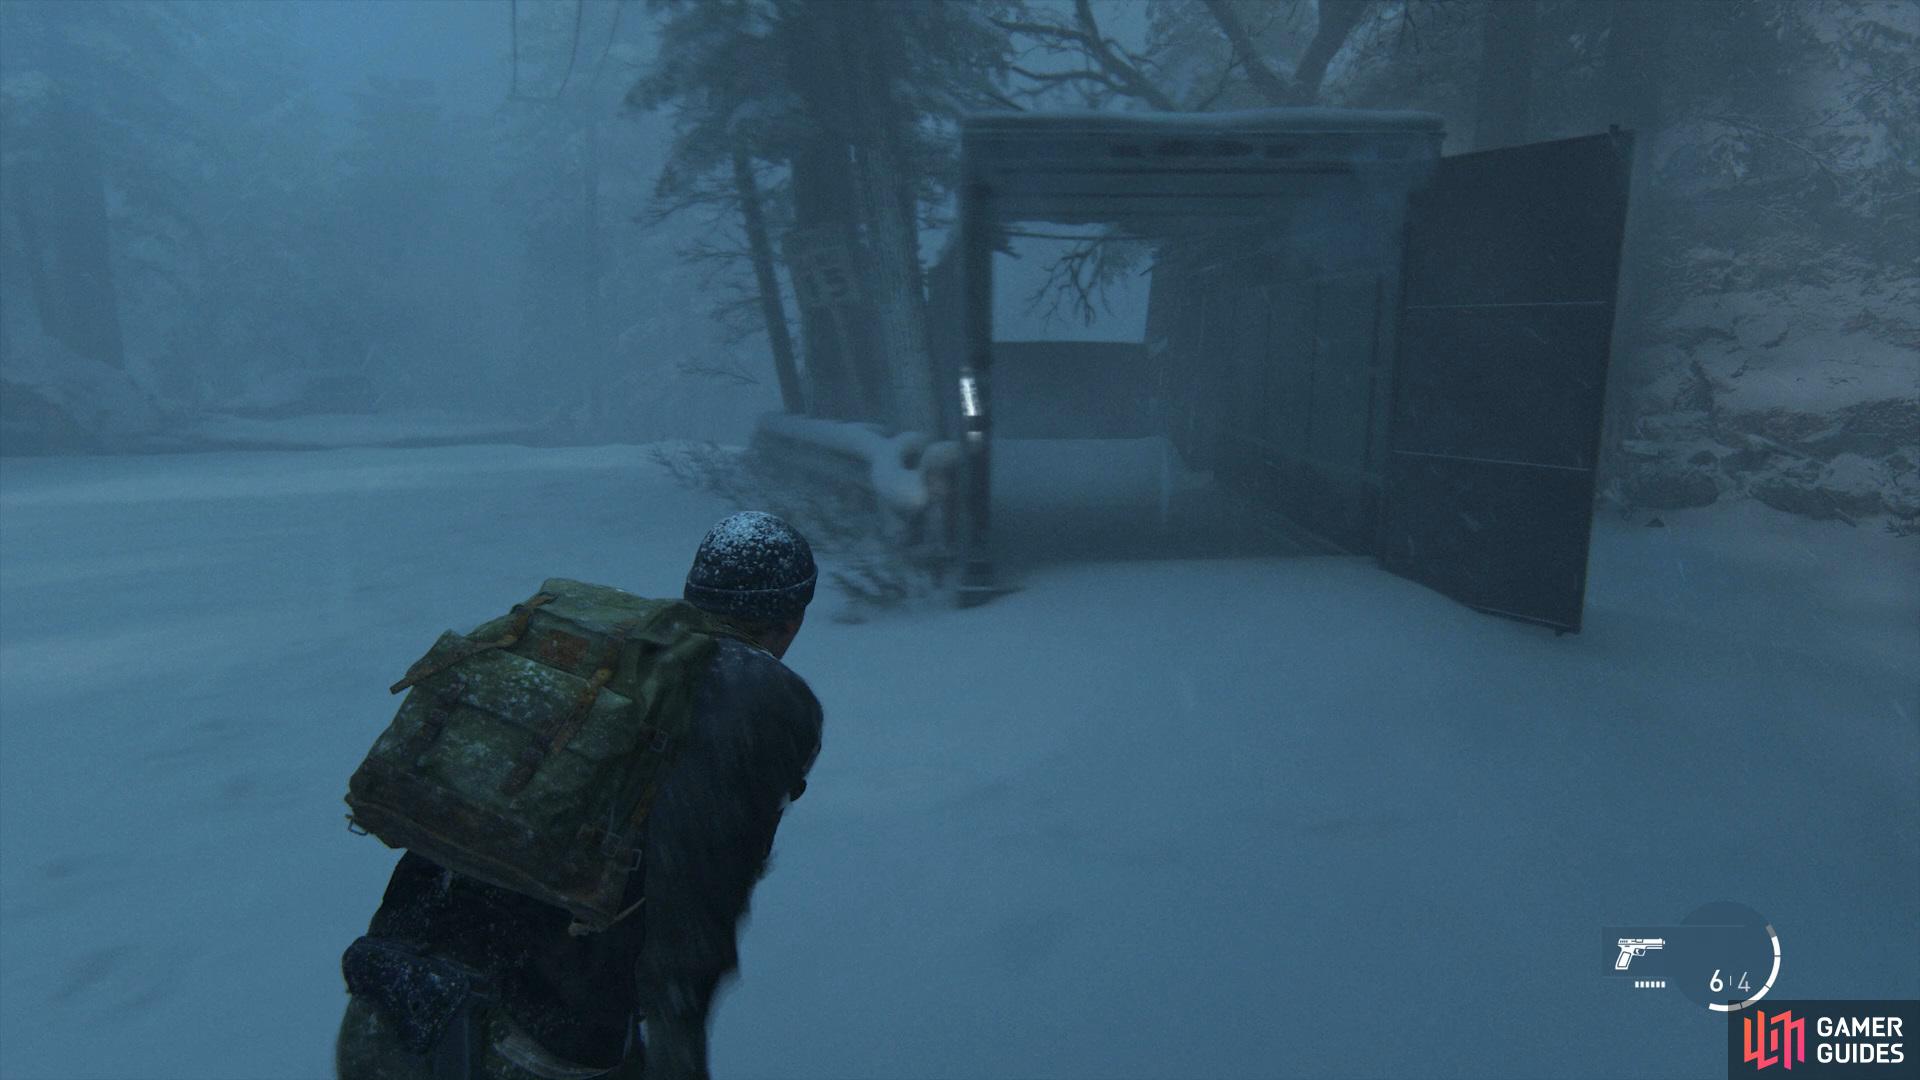 Head through the container and follow the path along until you reach a large area full of crates